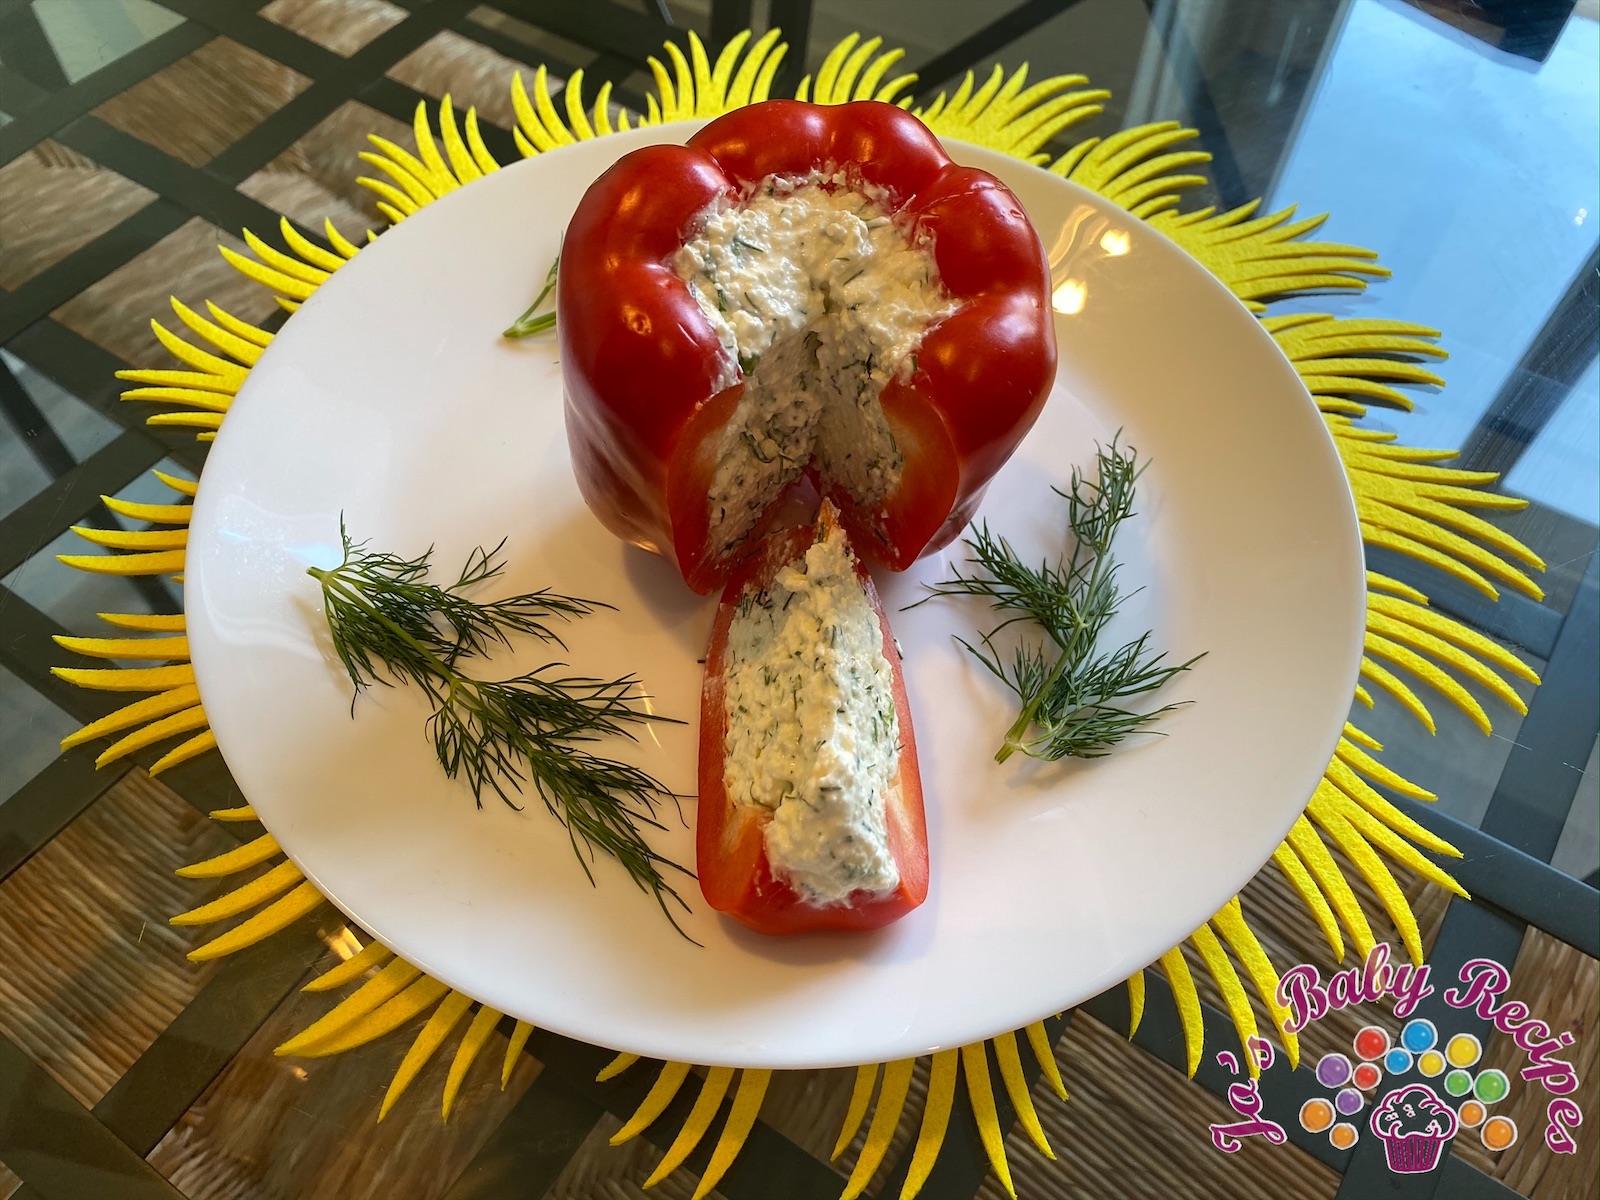 Red Pepper stuffed with Creamy Cheese